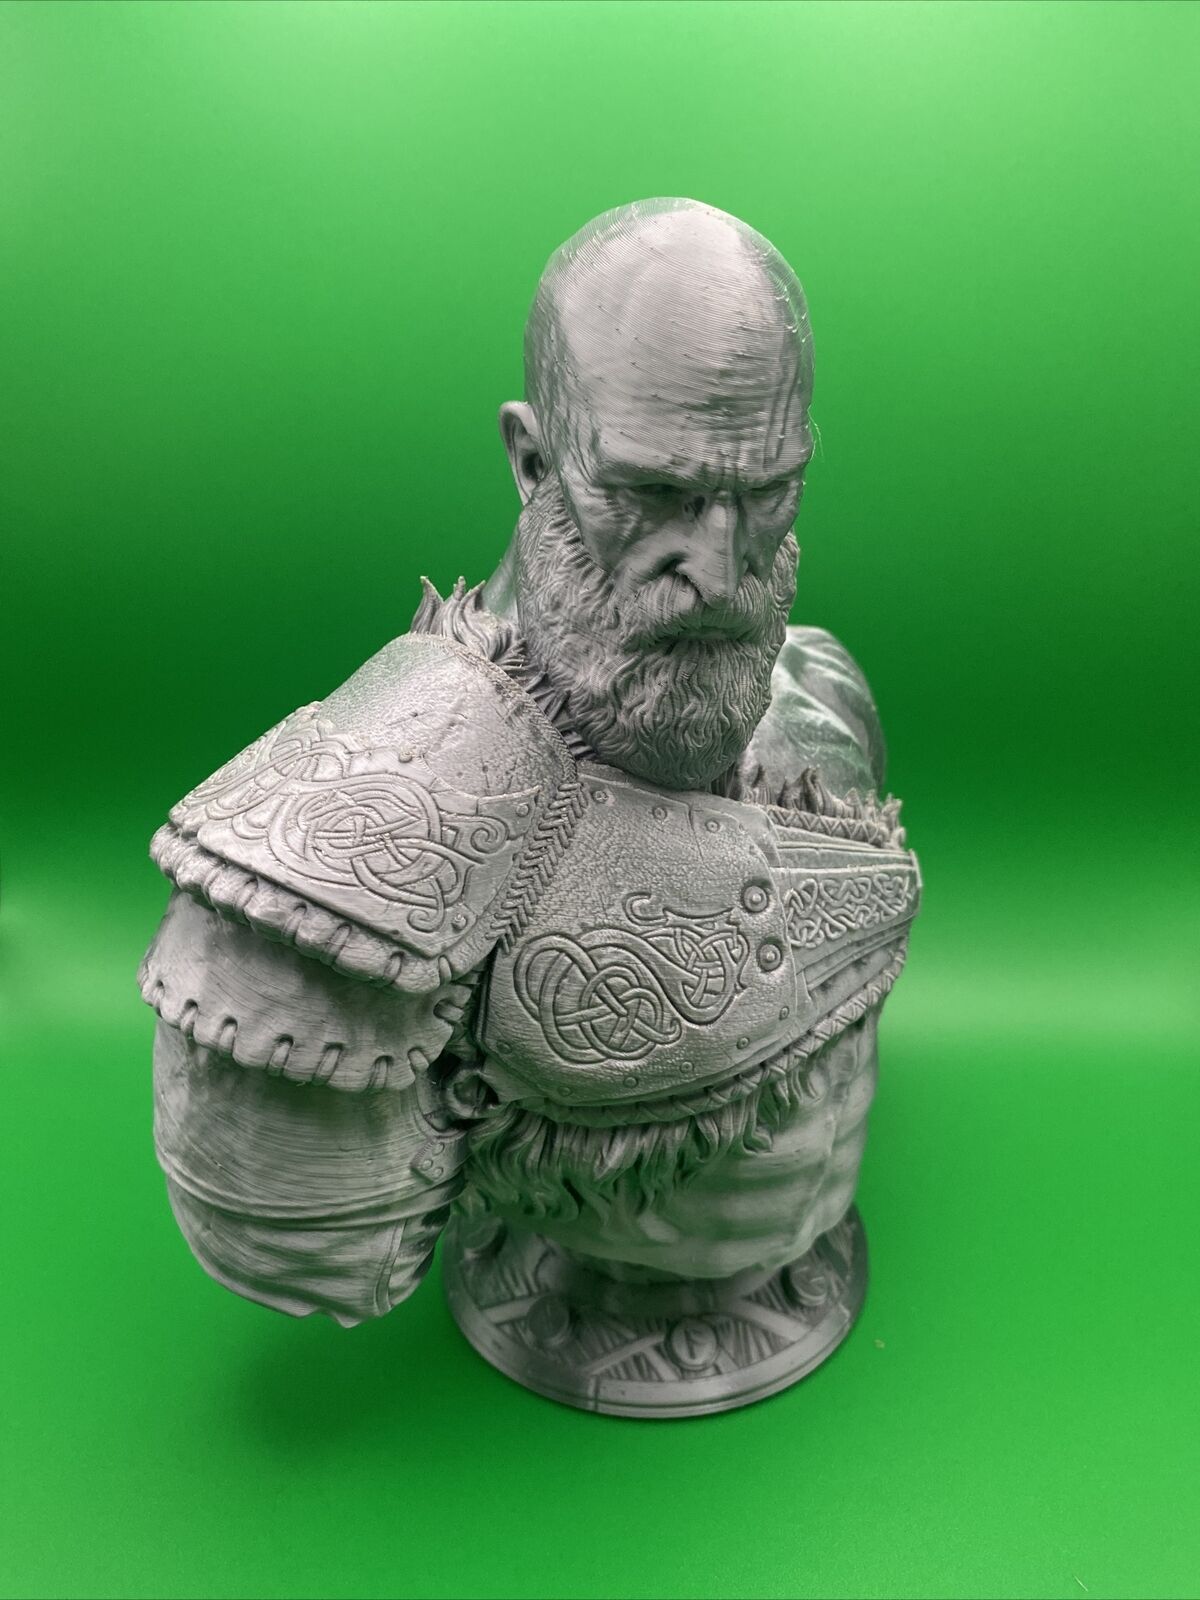 Kratos Statue 3D Printed Bust Paintable Plastic Filament 7 Inches Tall